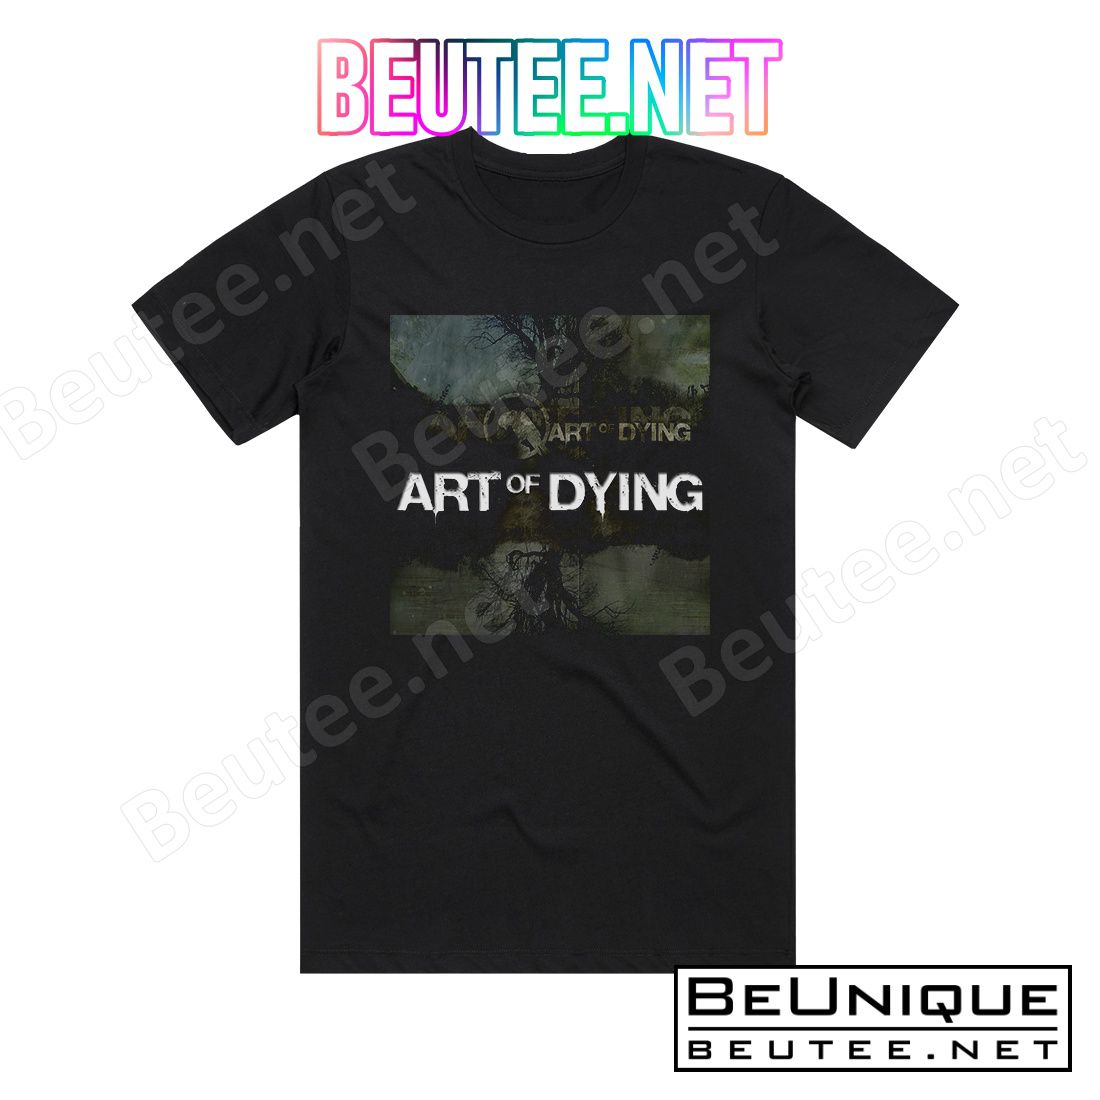 Art of Dying Art Of Dying 1 Album Cover T-Shirt